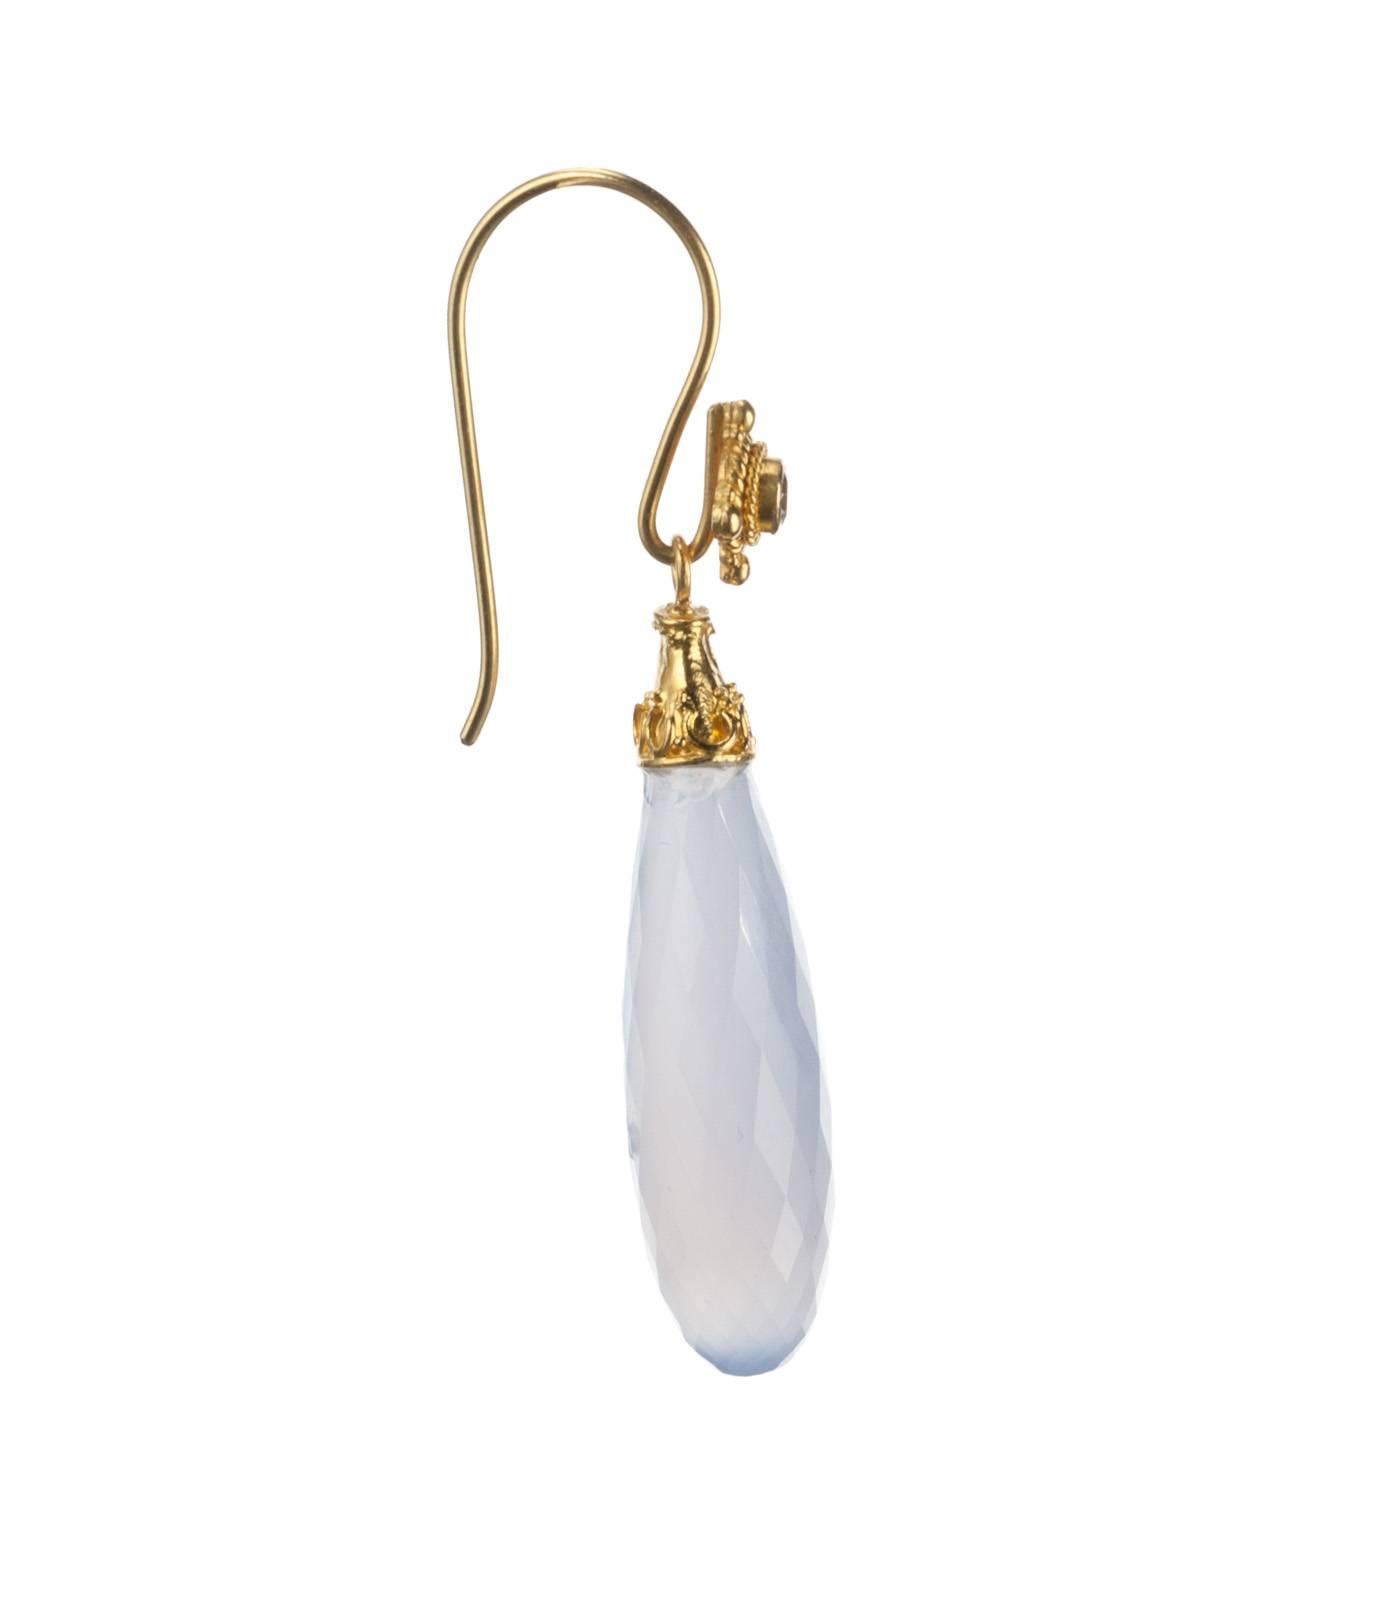 A pair of soft blue chalcedony briolettes, 32.10ctw., are suspended from this pair of 18-karat yellow gold drops earrings. The drops hang lightly from french ear-wires accented with a pair of brilliant-cut round diamonds, .10ctw. of G color and SI